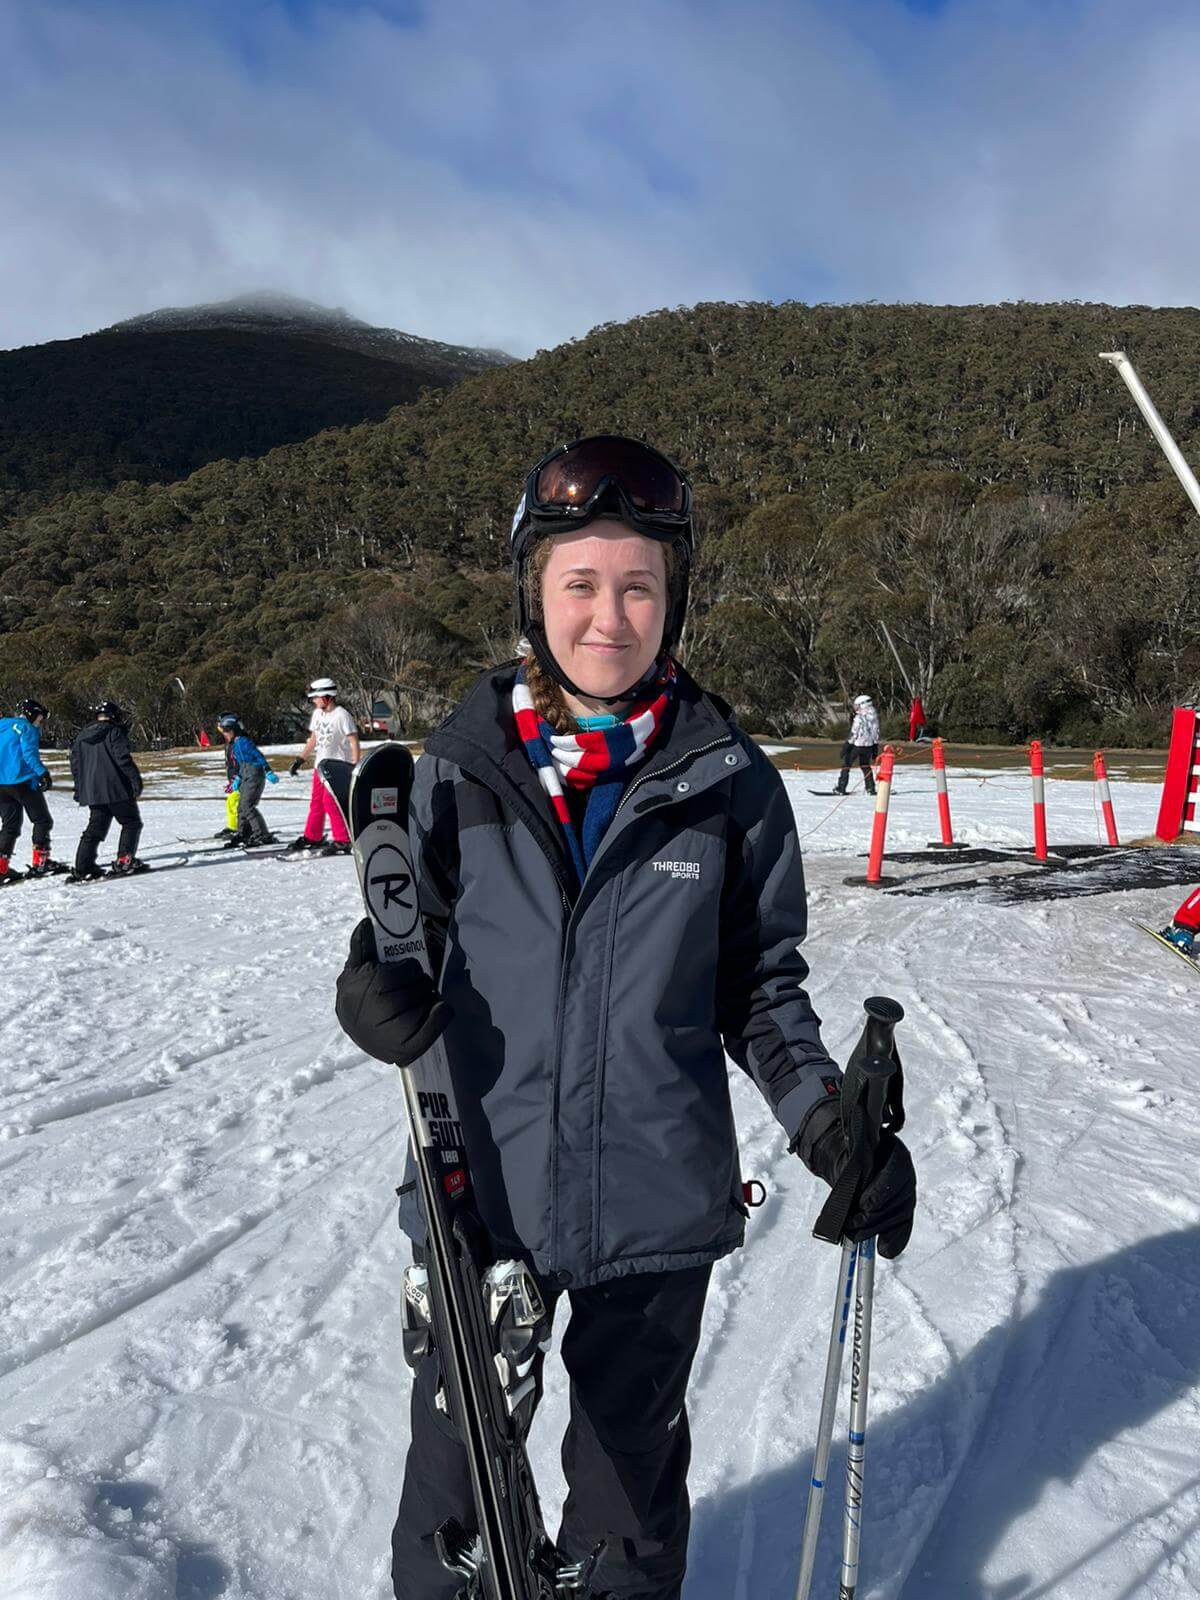 participant on canteen snow trip in thredbo